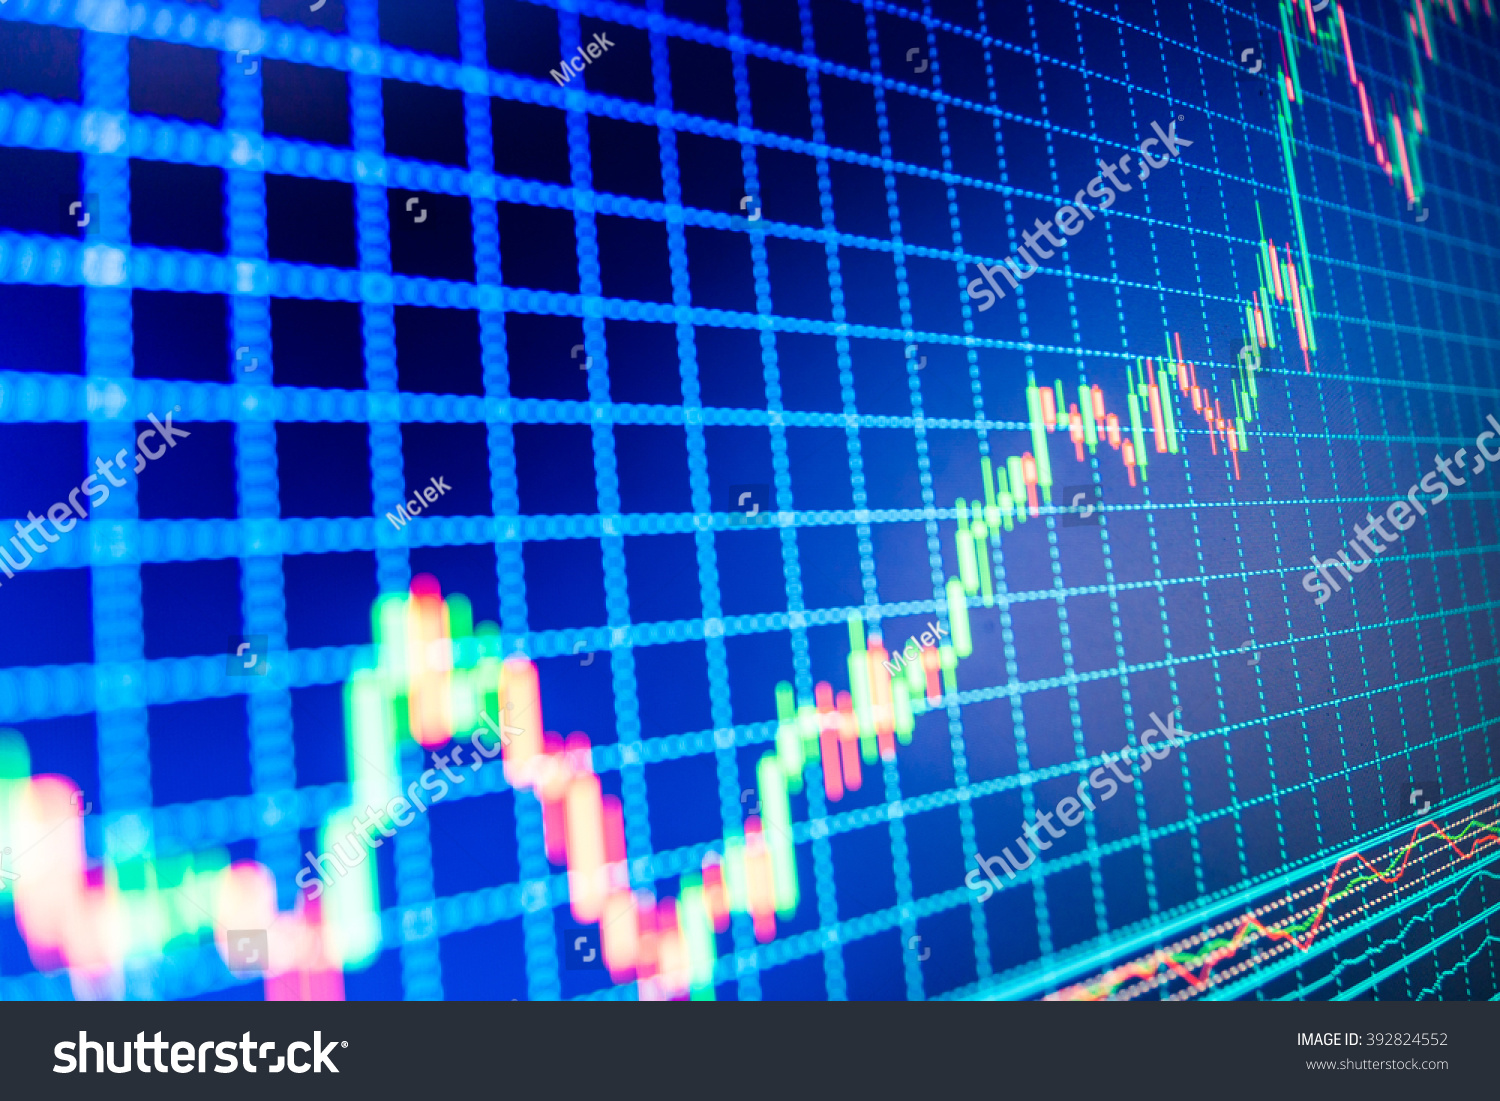 Forex online quotes and charts forexpf usd eur forecast